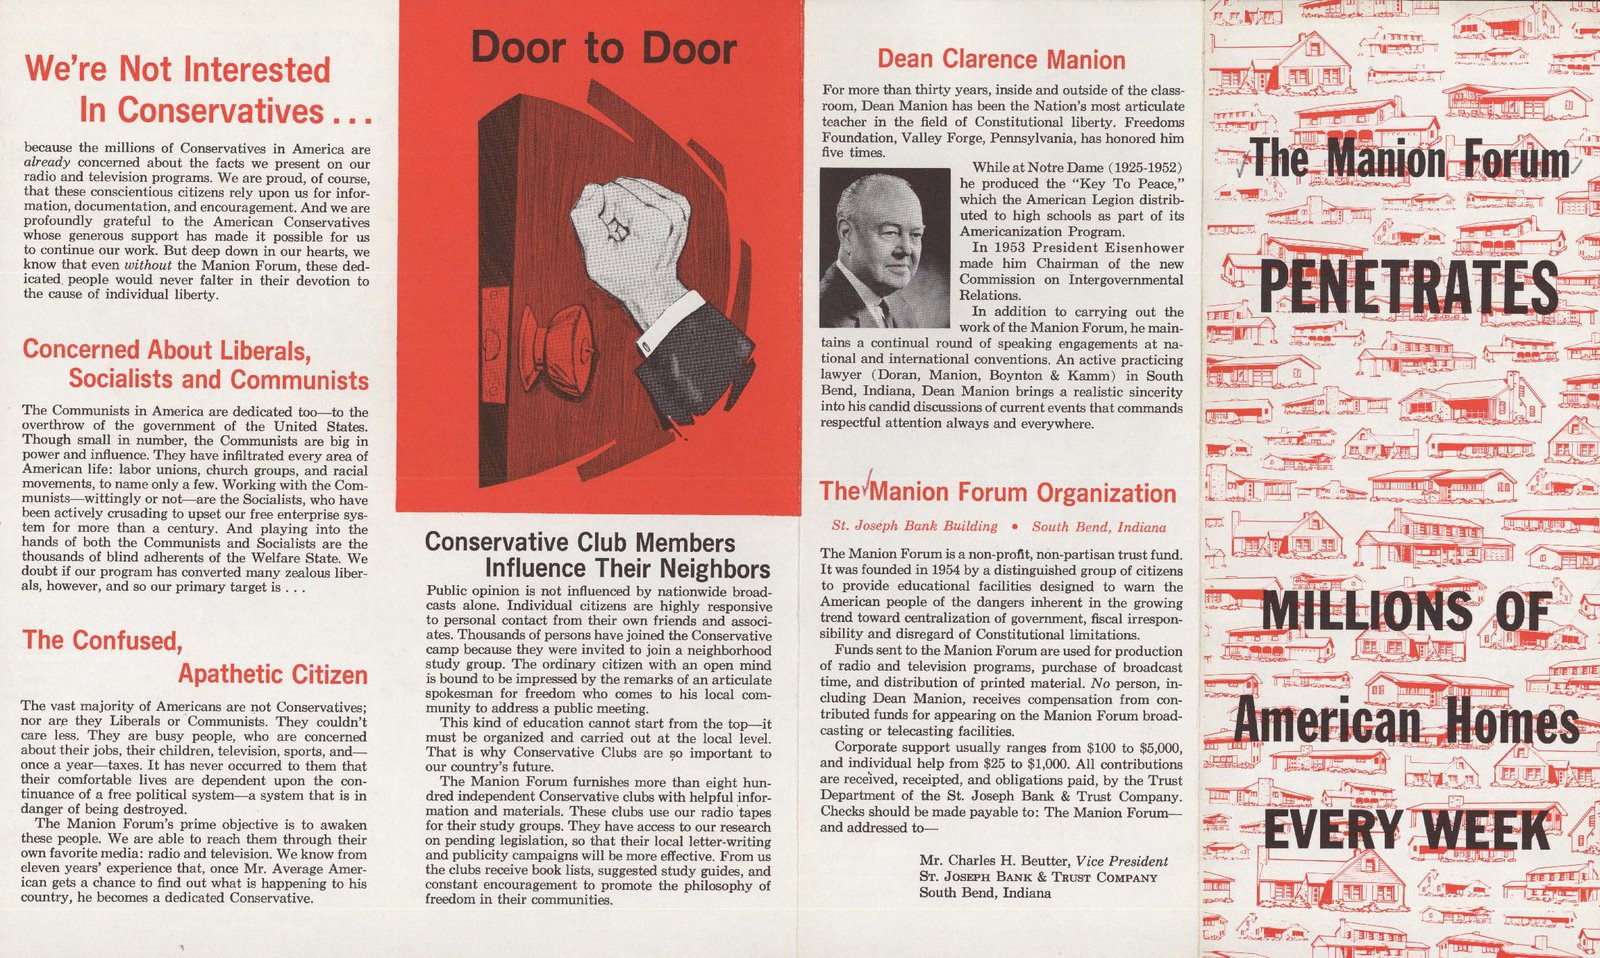 Brochure from Manion Forum Organization, which was concerned about liberals, socialists and communists